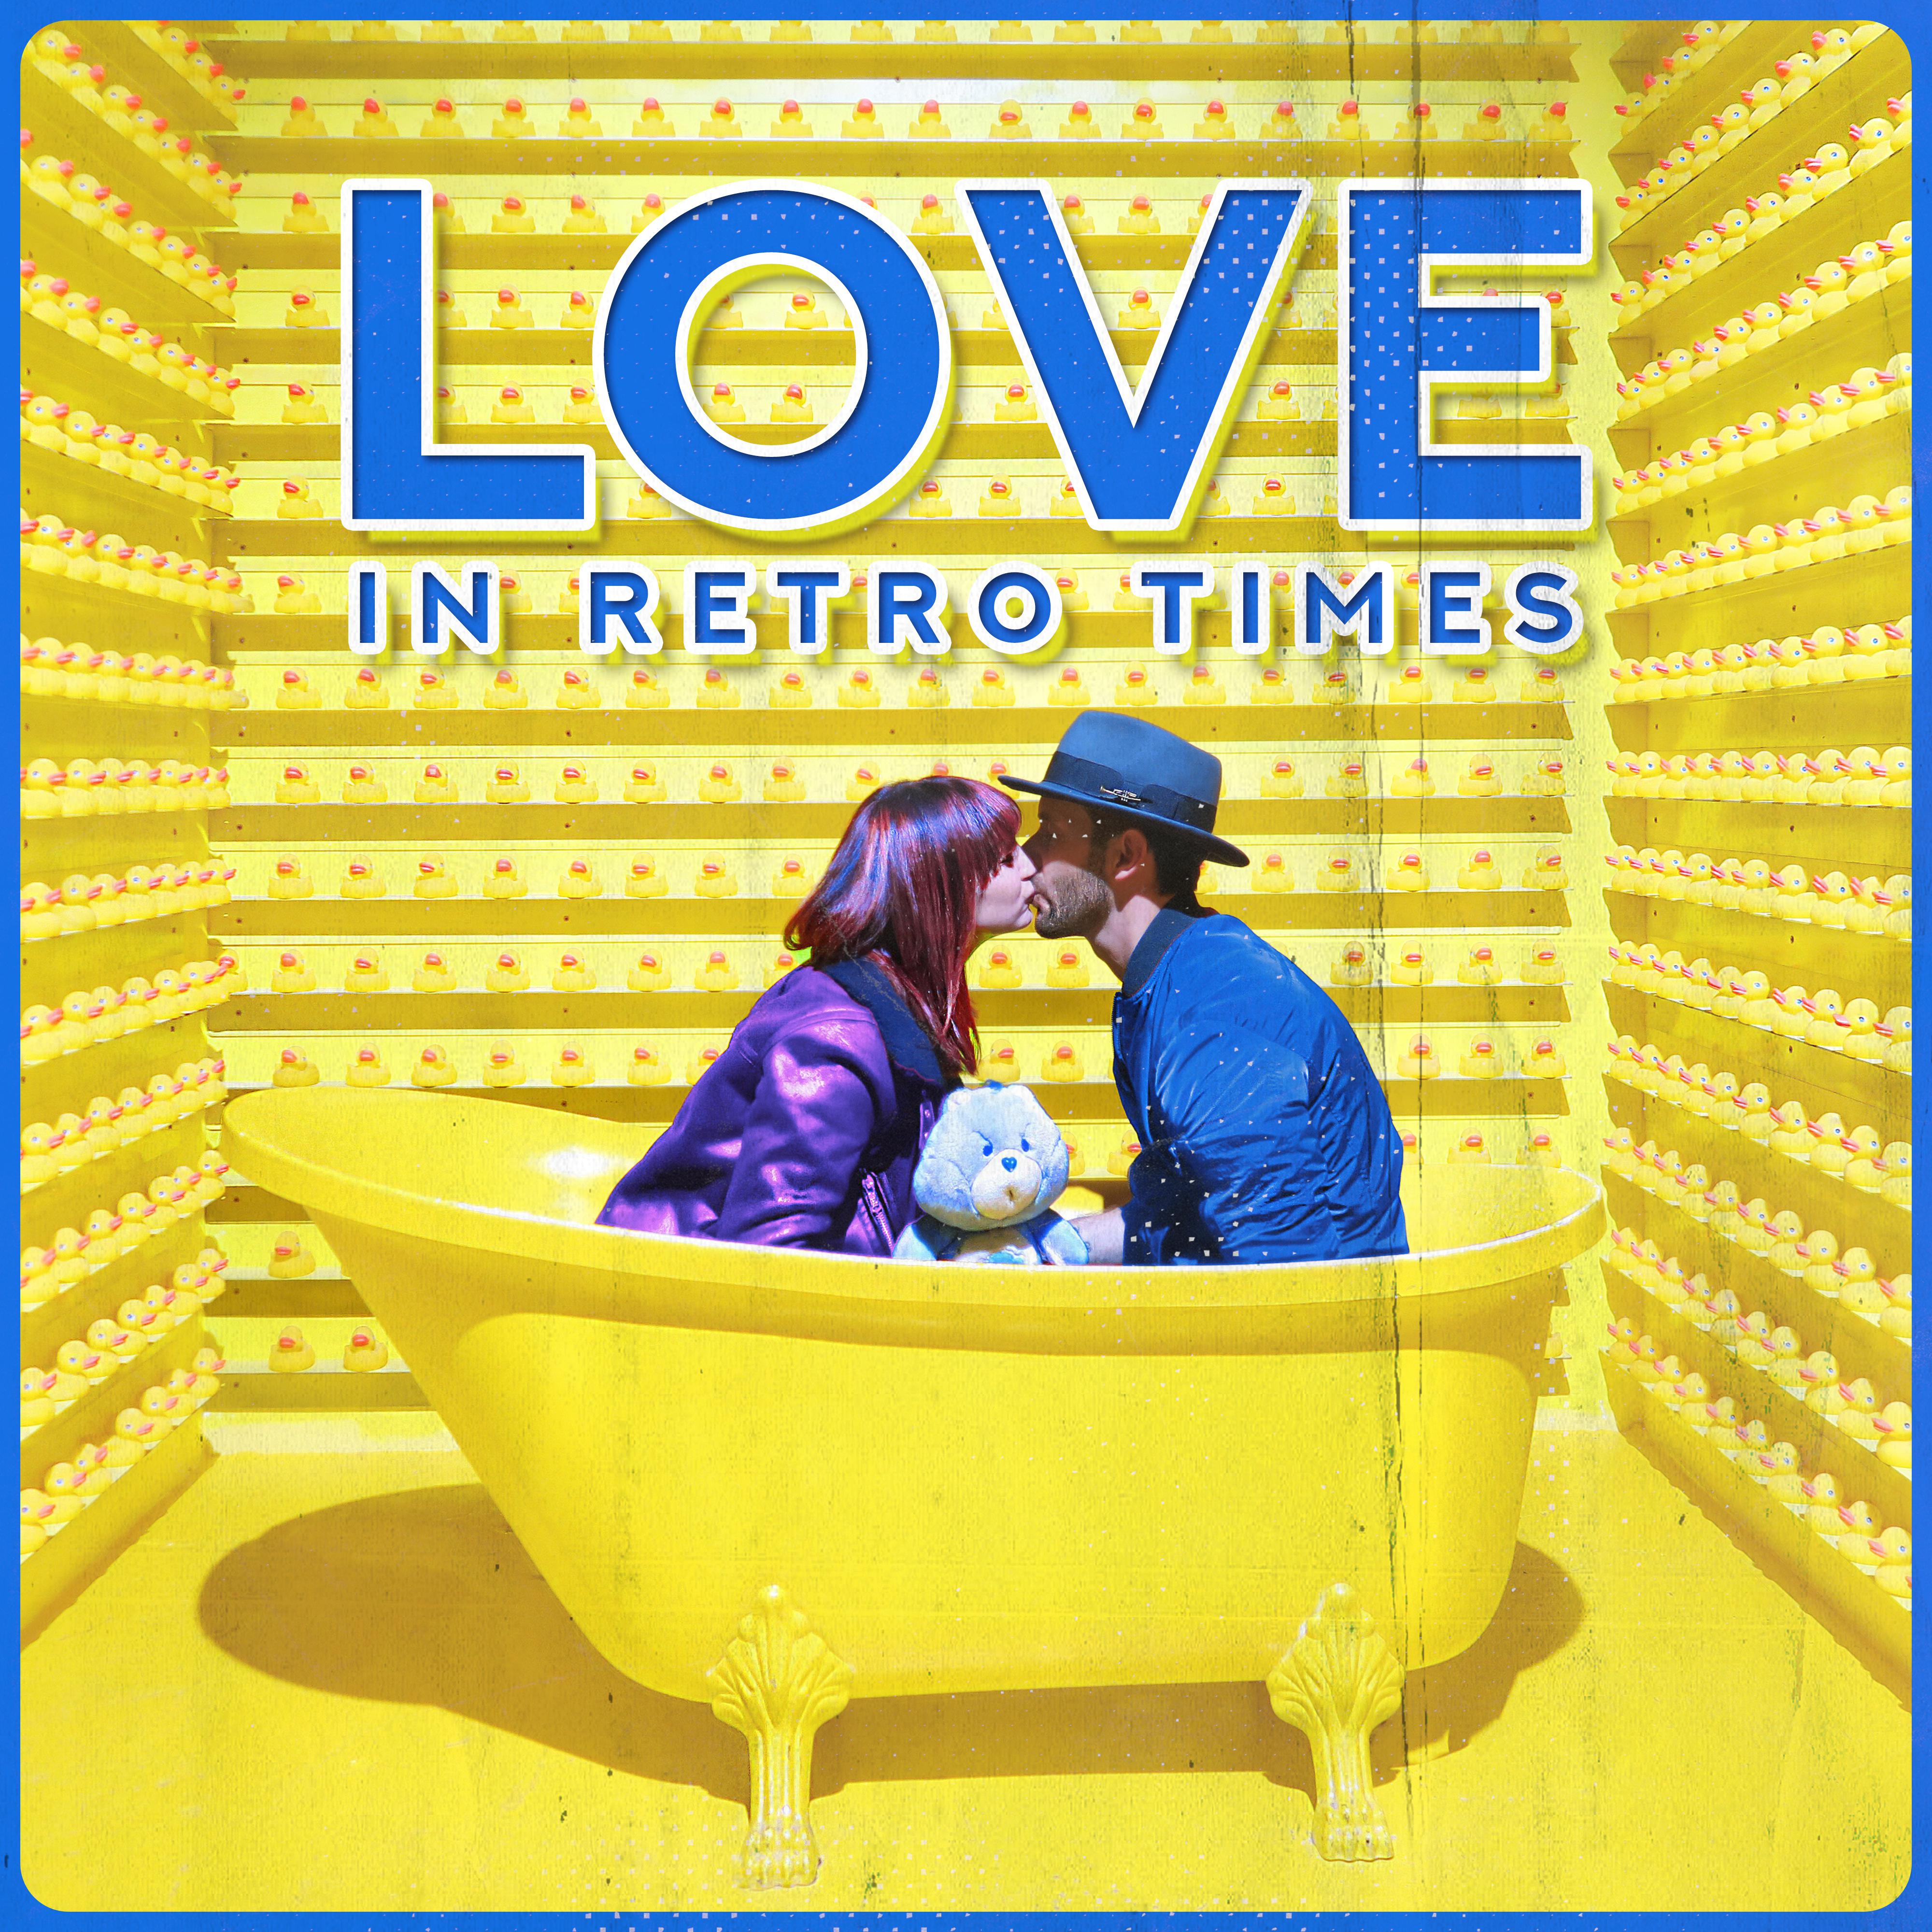 Love in Retro Times: Romantic Jazz Tracks in the Musical Mainstream of the Previous Century